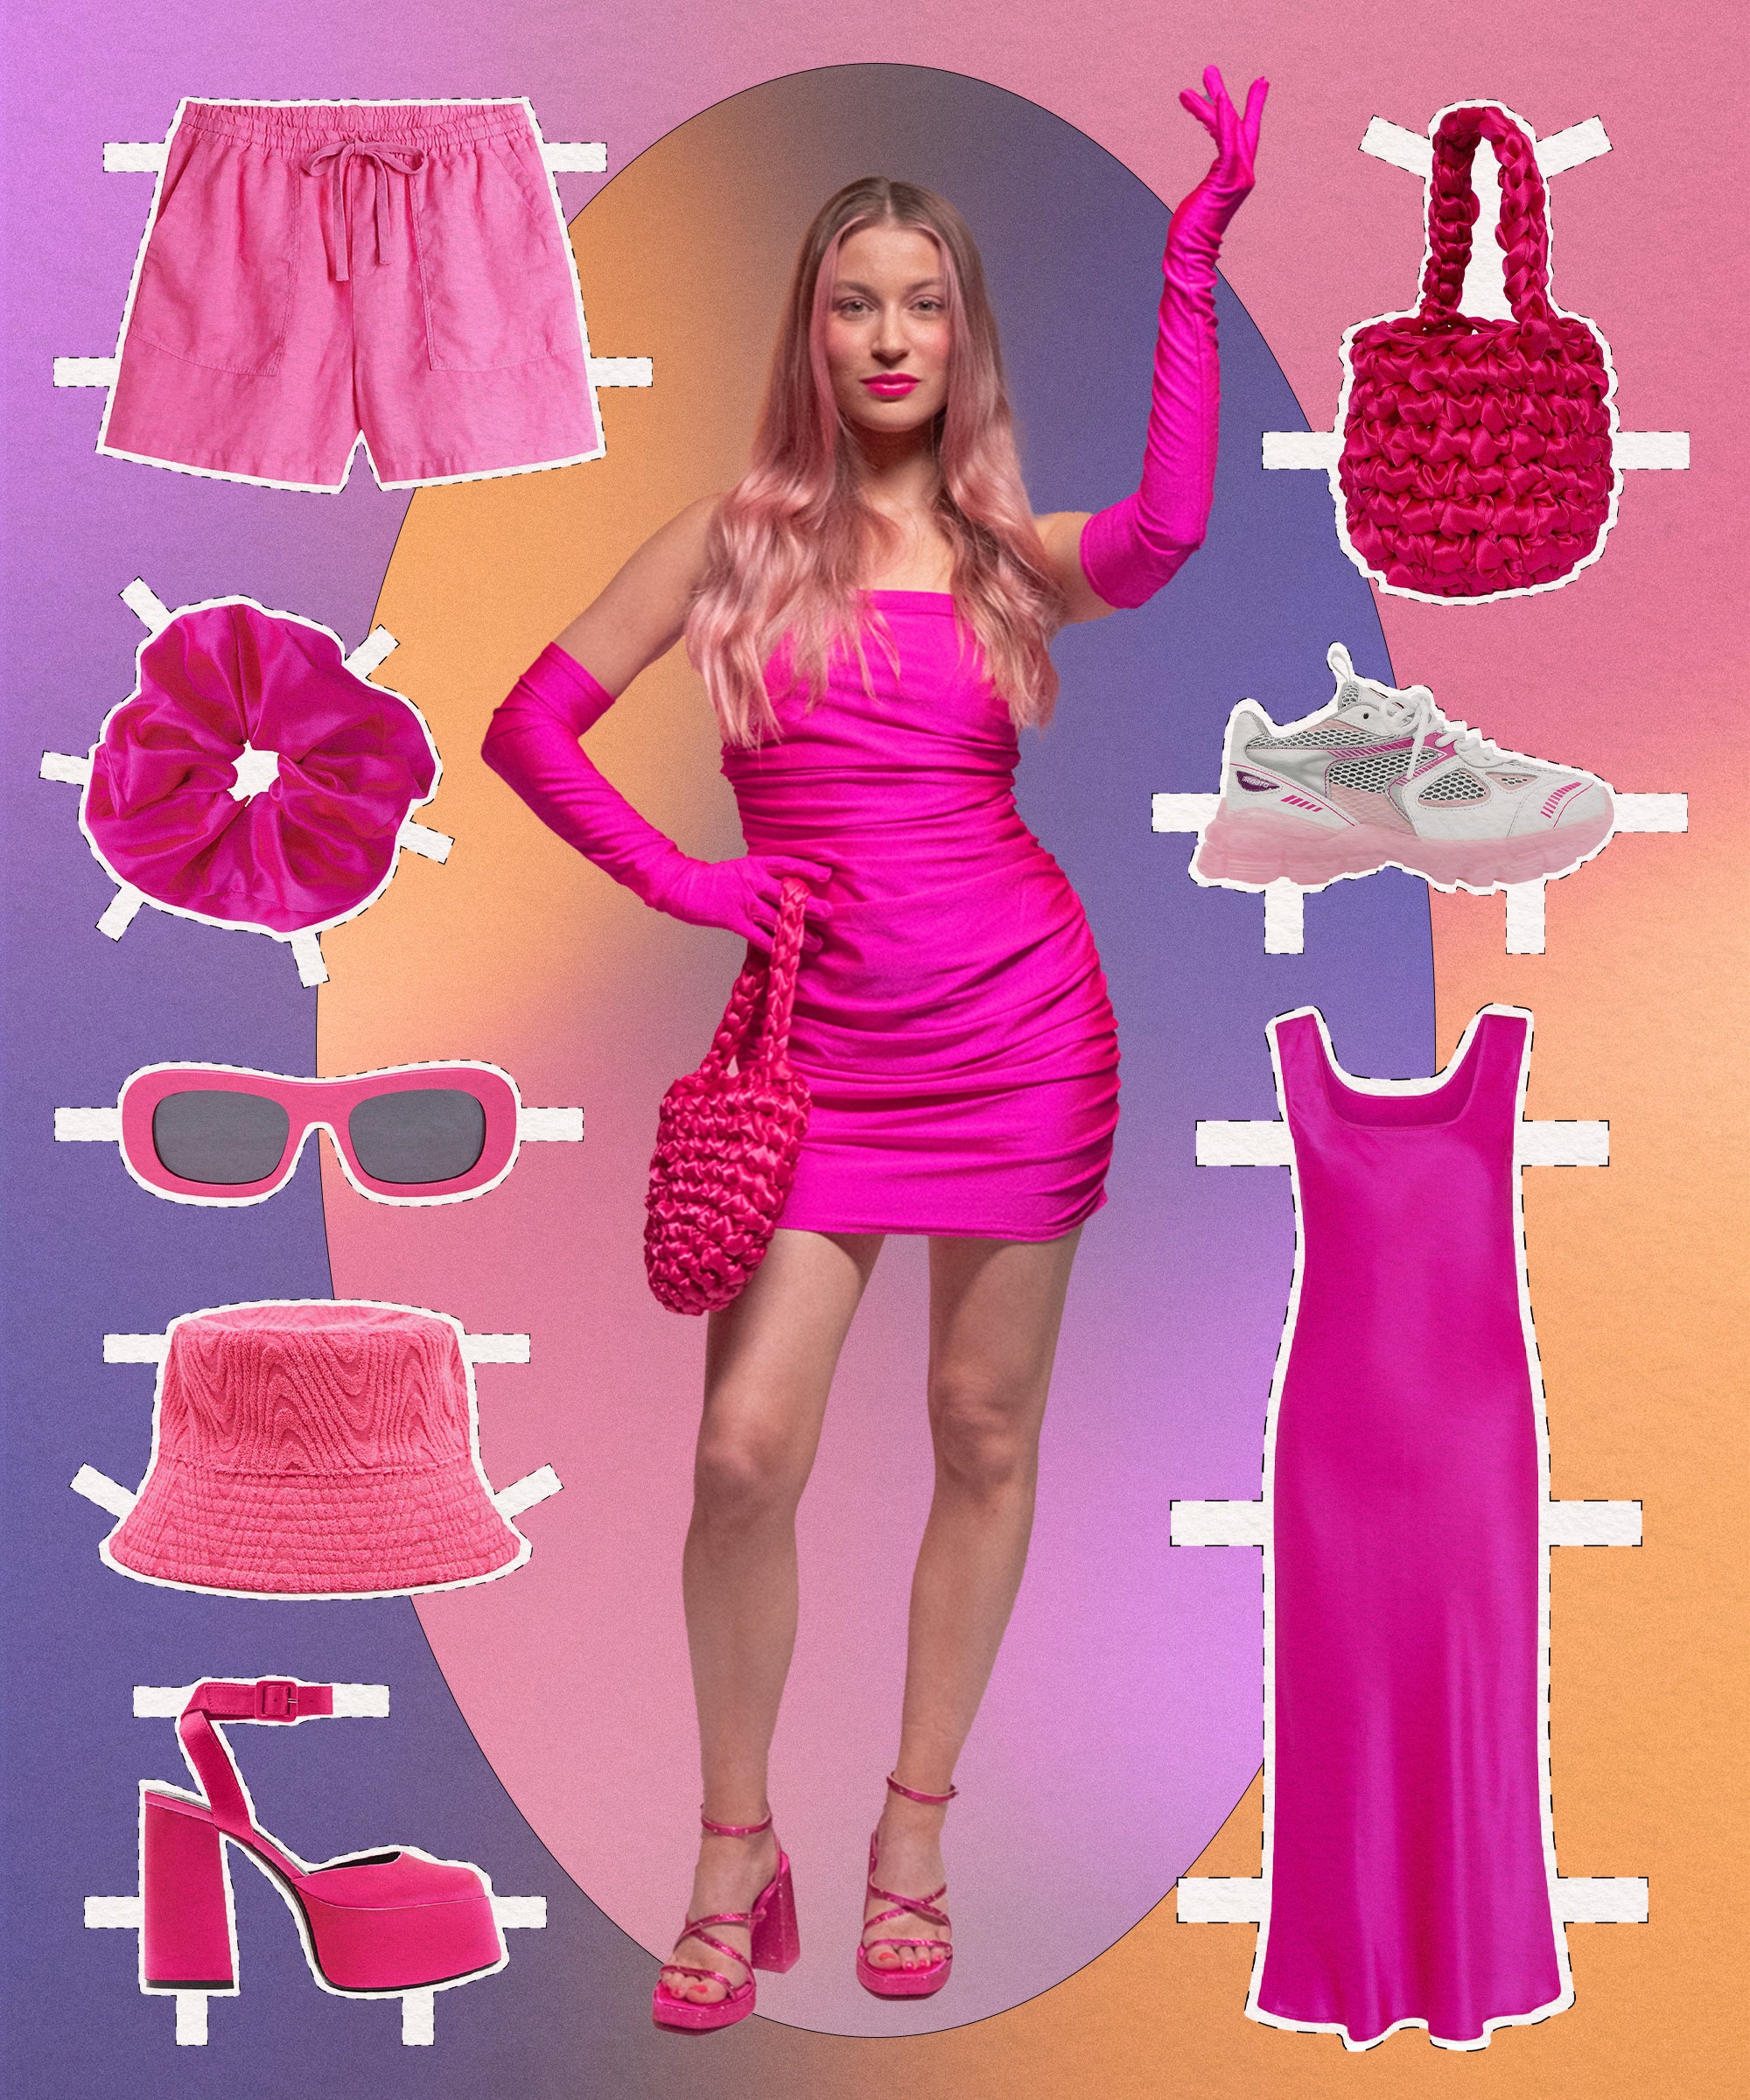 Pink Party & Barbiecore Supplies